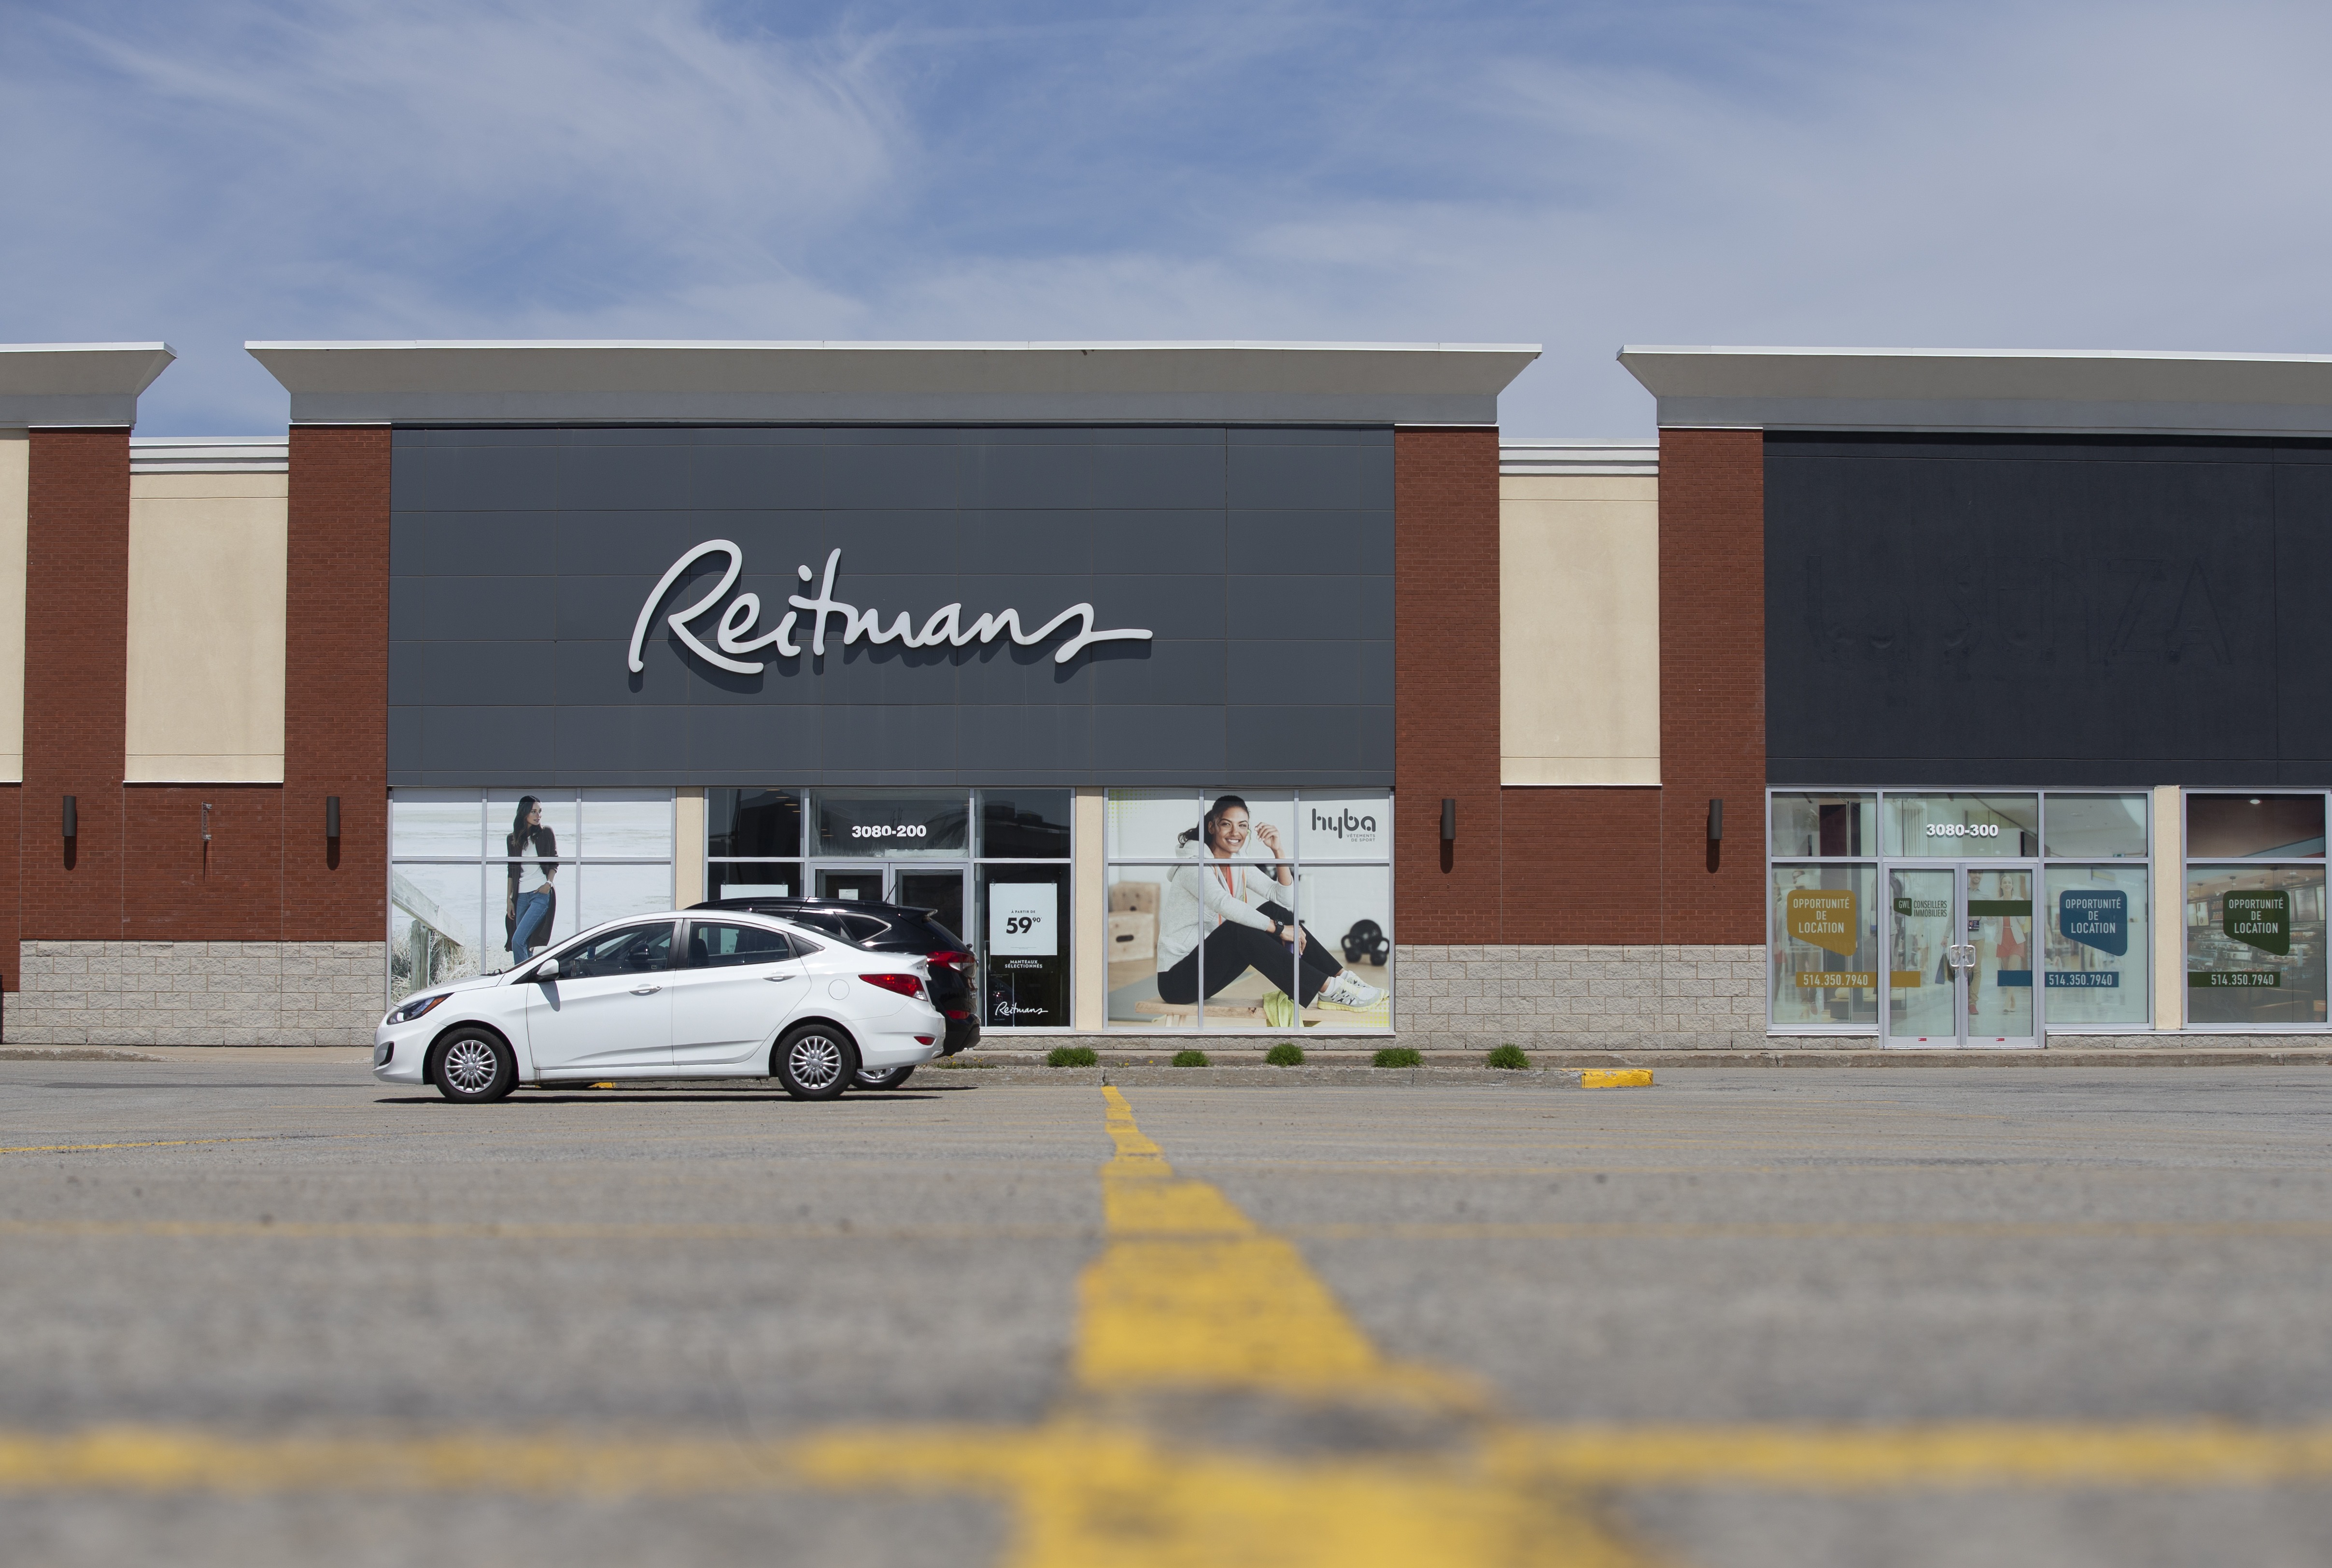 Reitmans closing Thyme Maternity, Addition Elle brands during